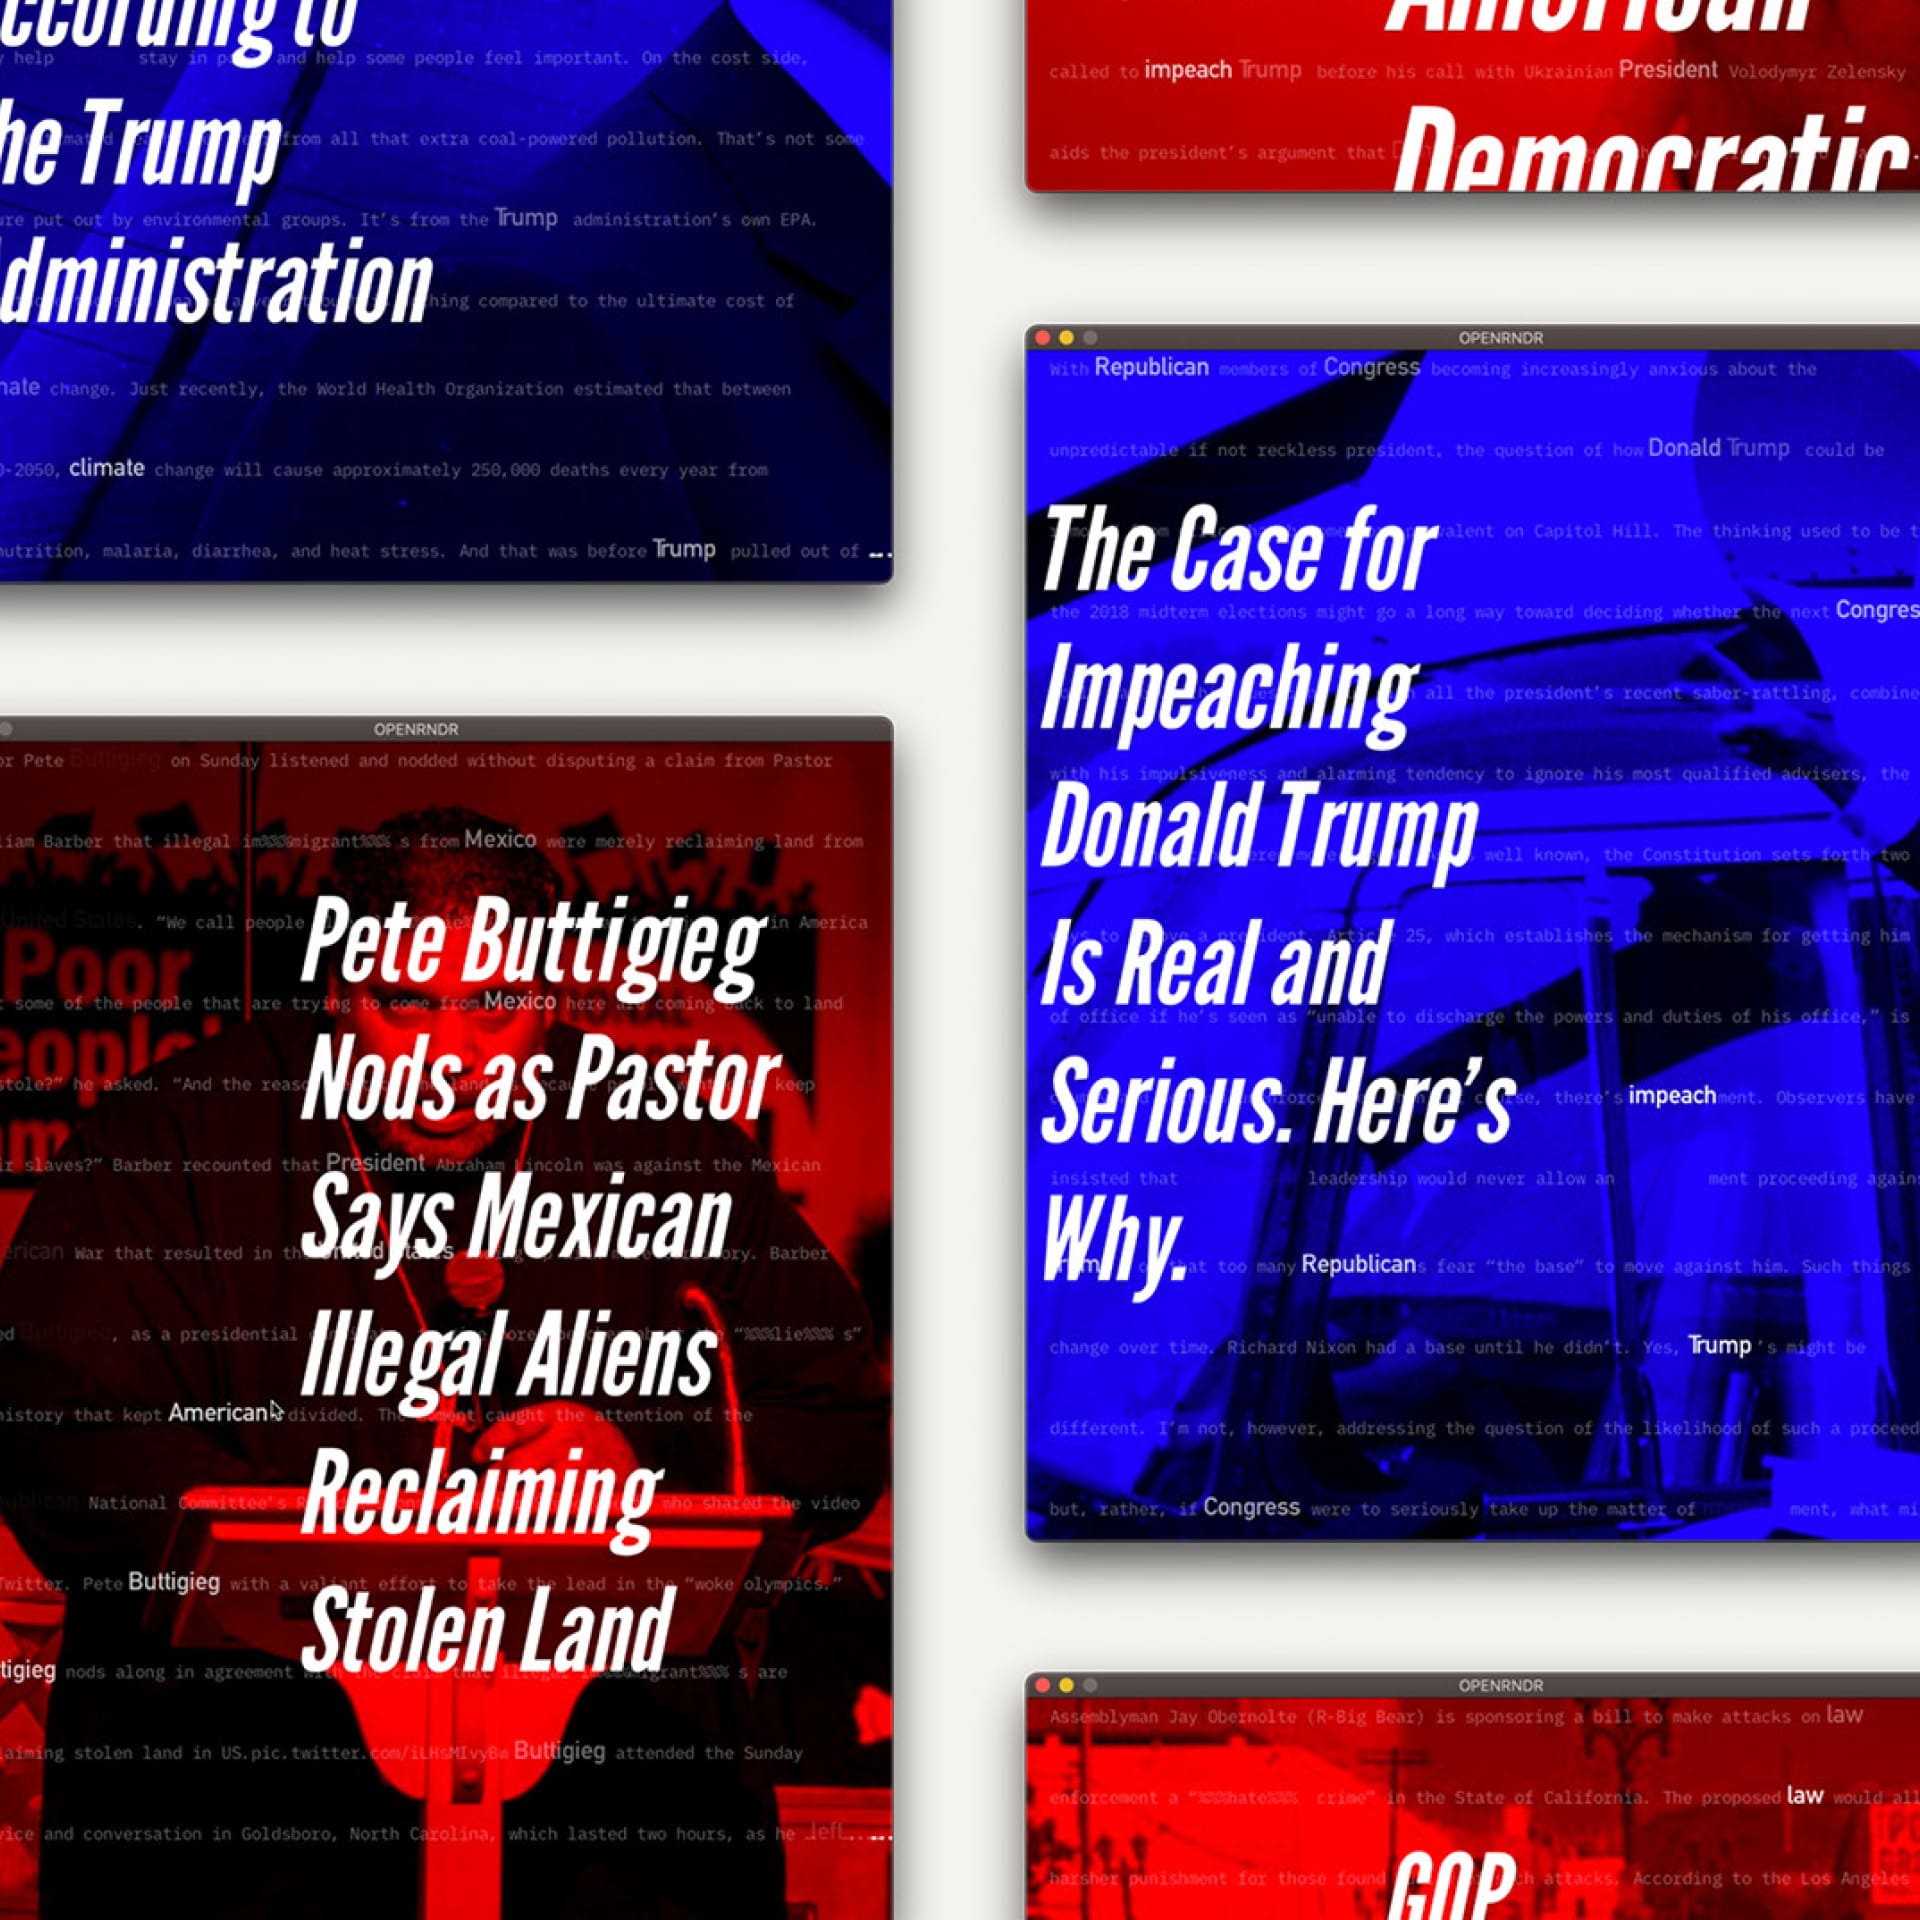 Generative political poster series. Depicts five posters laid next to each other against a white background. Each poster has large italicized white text and a photo edited with either a red or blue filter.